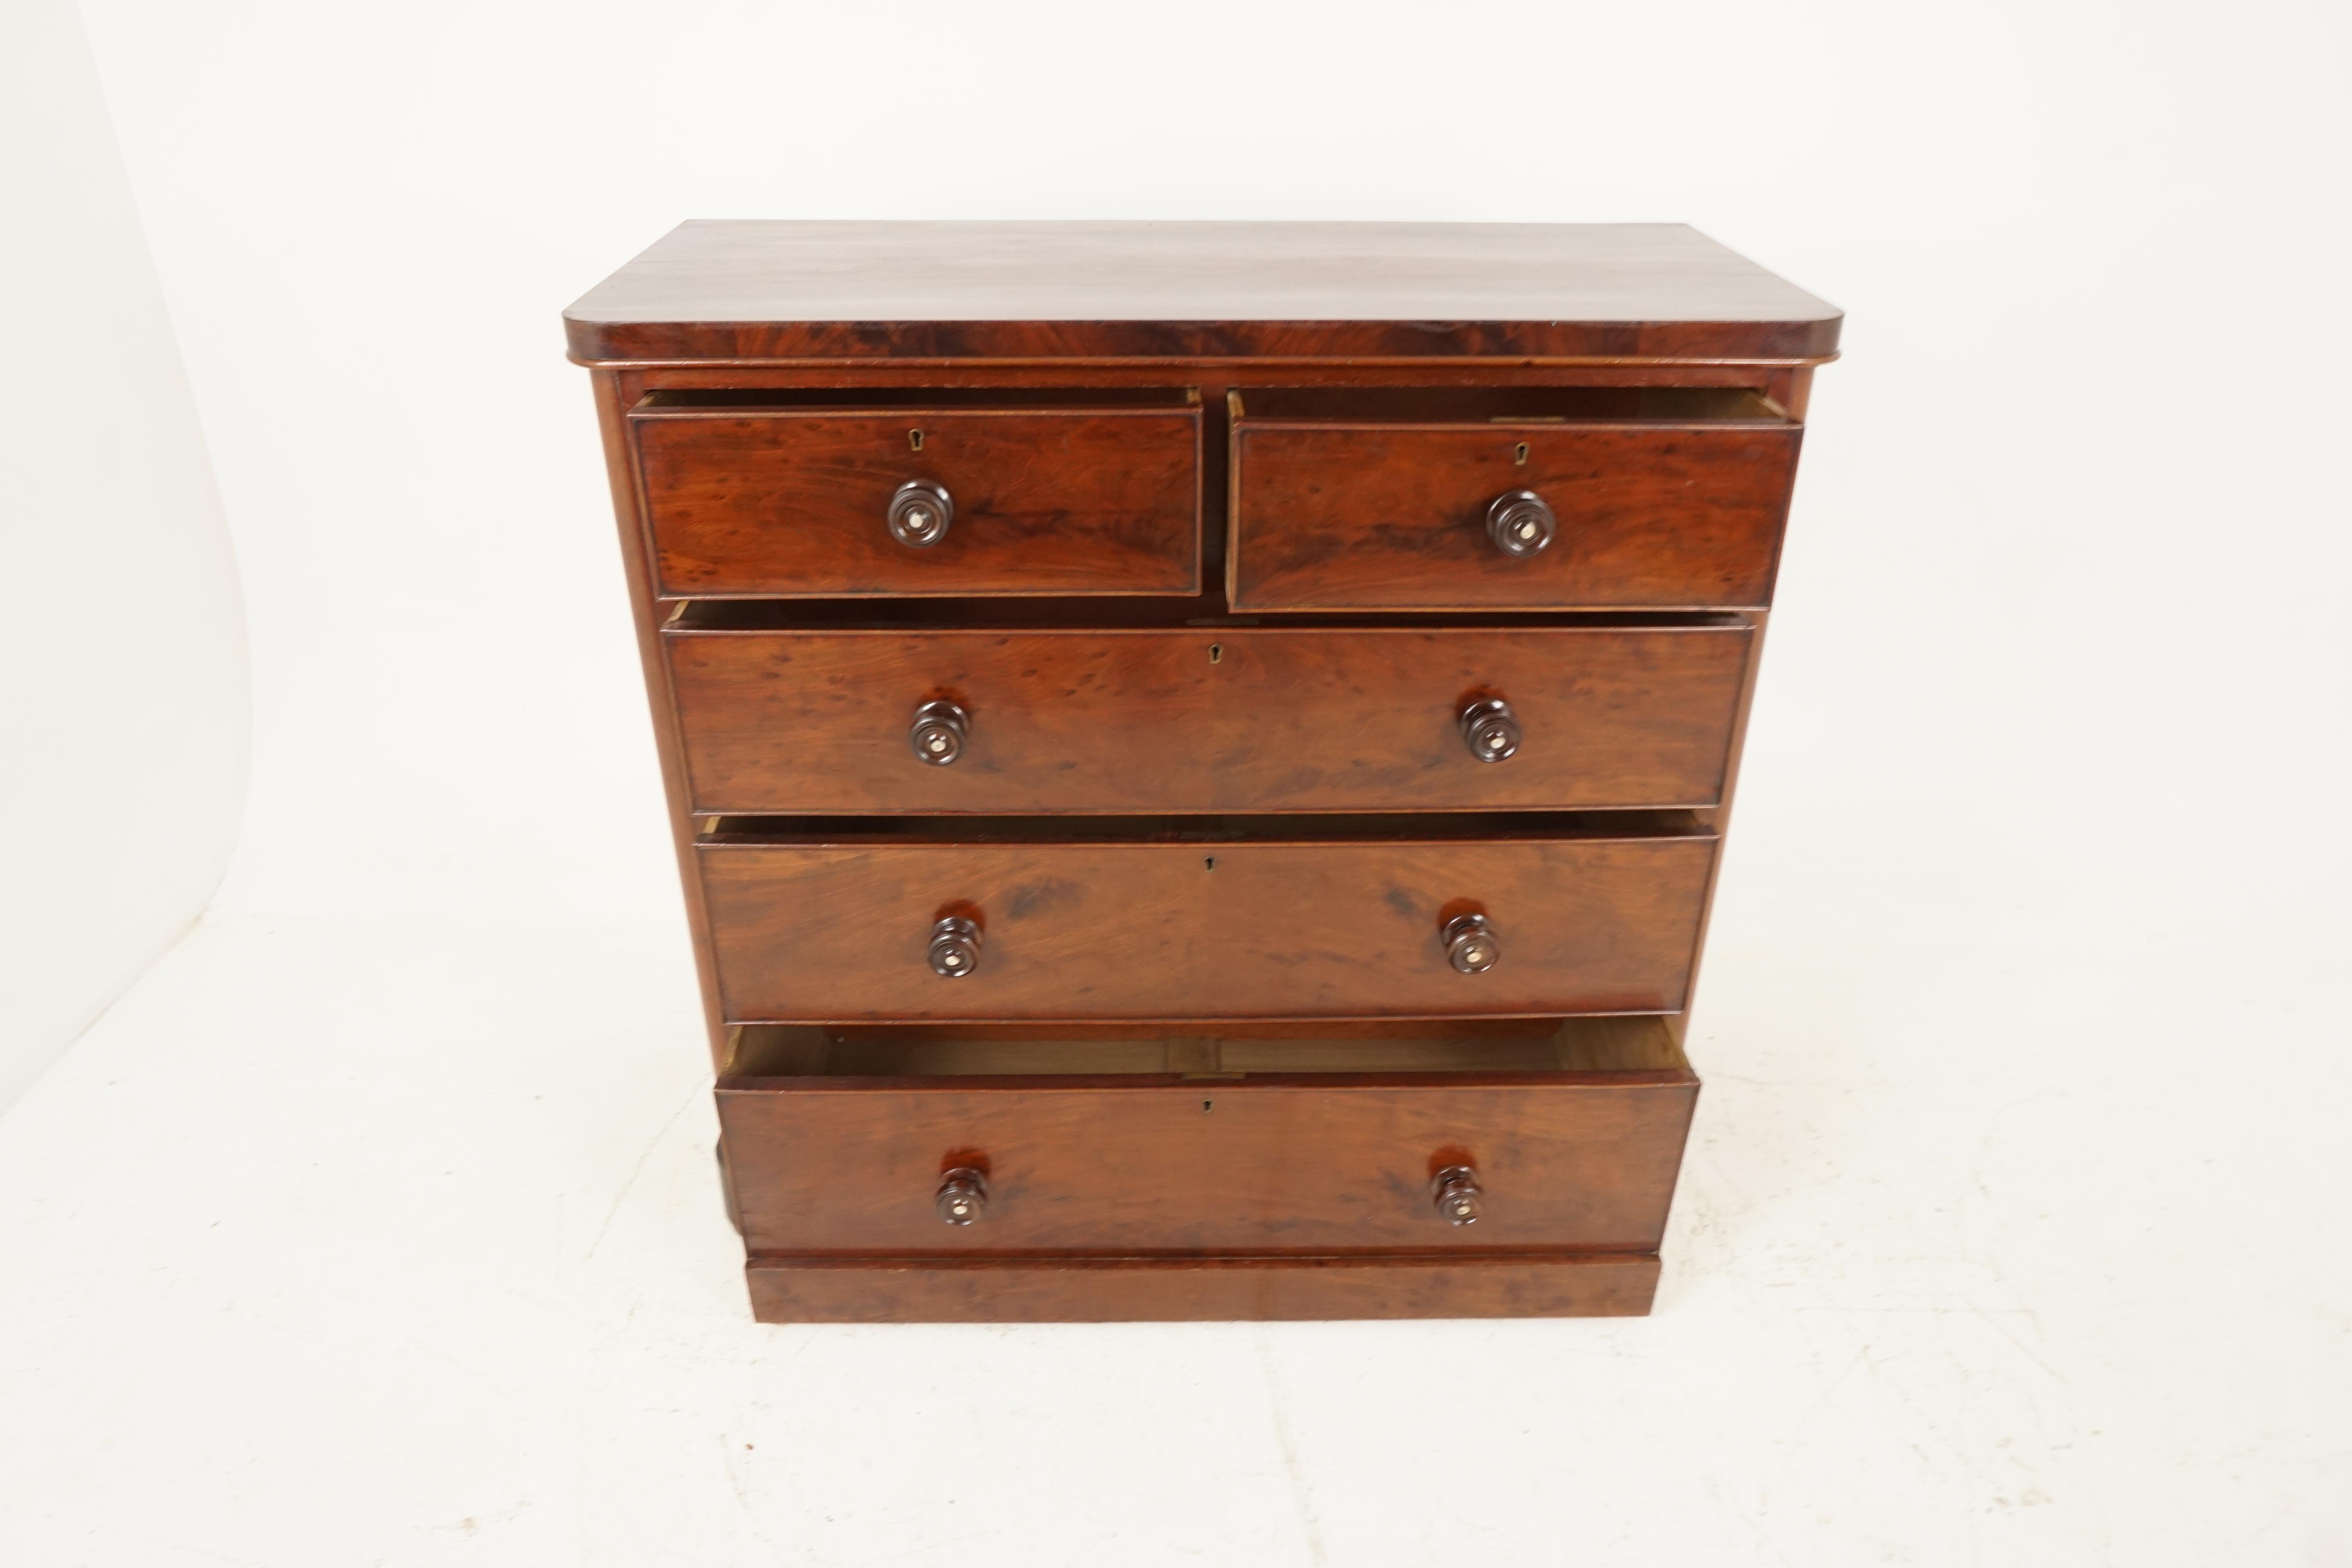 Antique Victorian dresser, mahogany chest of drawers, mother of pearl, Scotland 1870, B2274

Scotland, 1870
Solid mahogany and veneer
Original finish
Rectangular top with rounded ends
Two short and three graduating long drawers with beading to